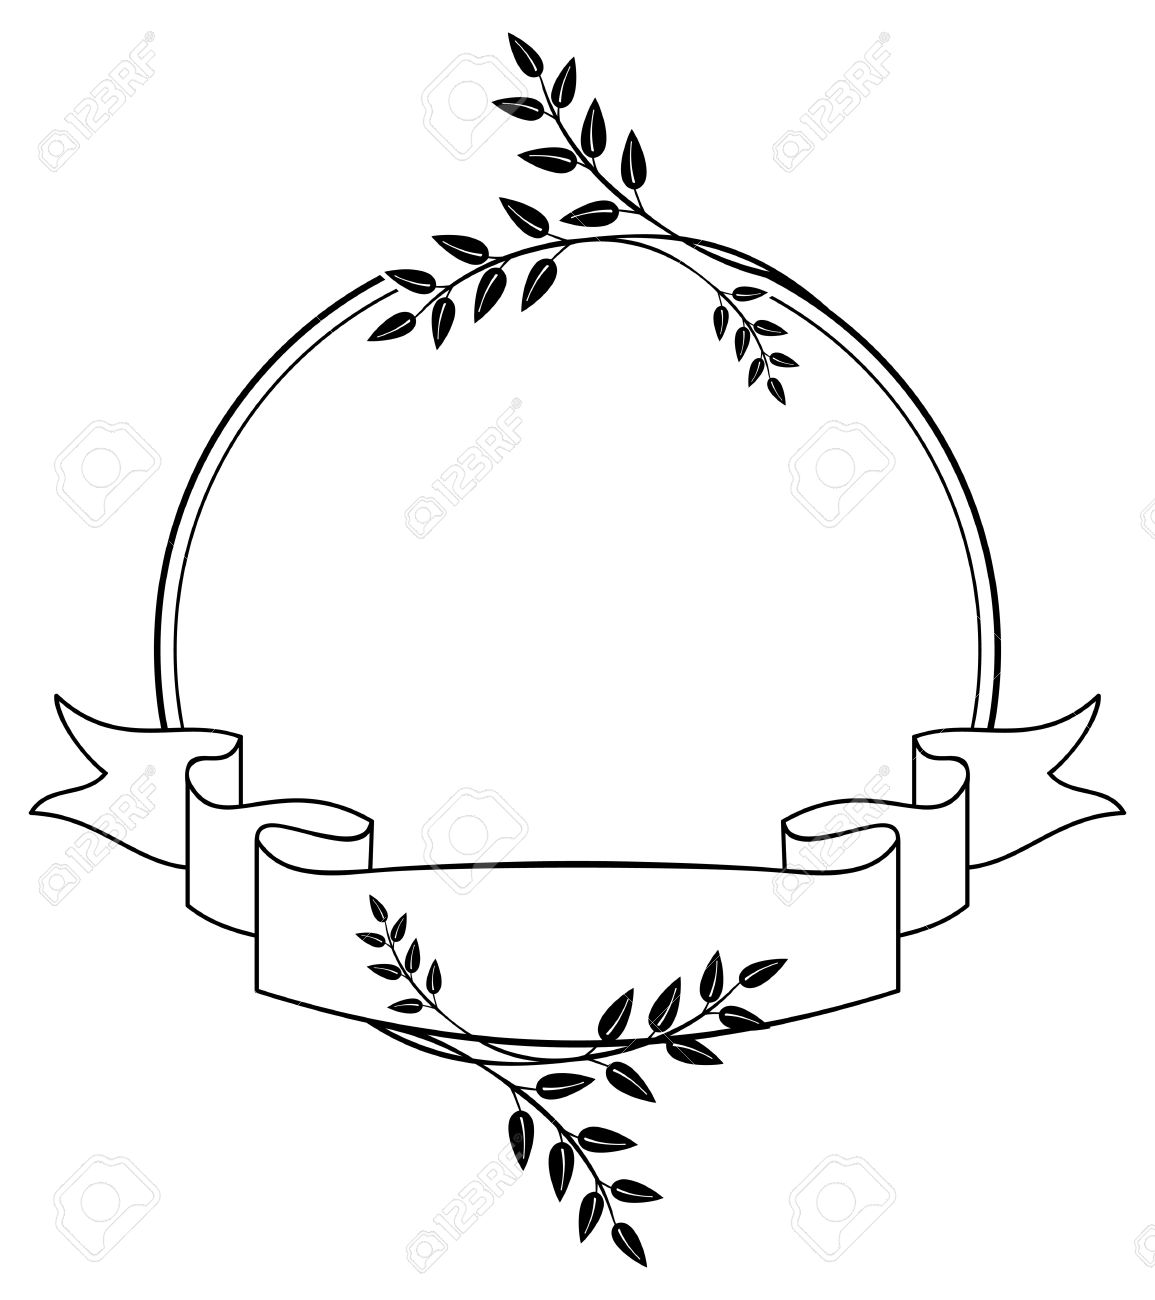 Black And White Round Frame With Floral Silhouettes. Copy Space.